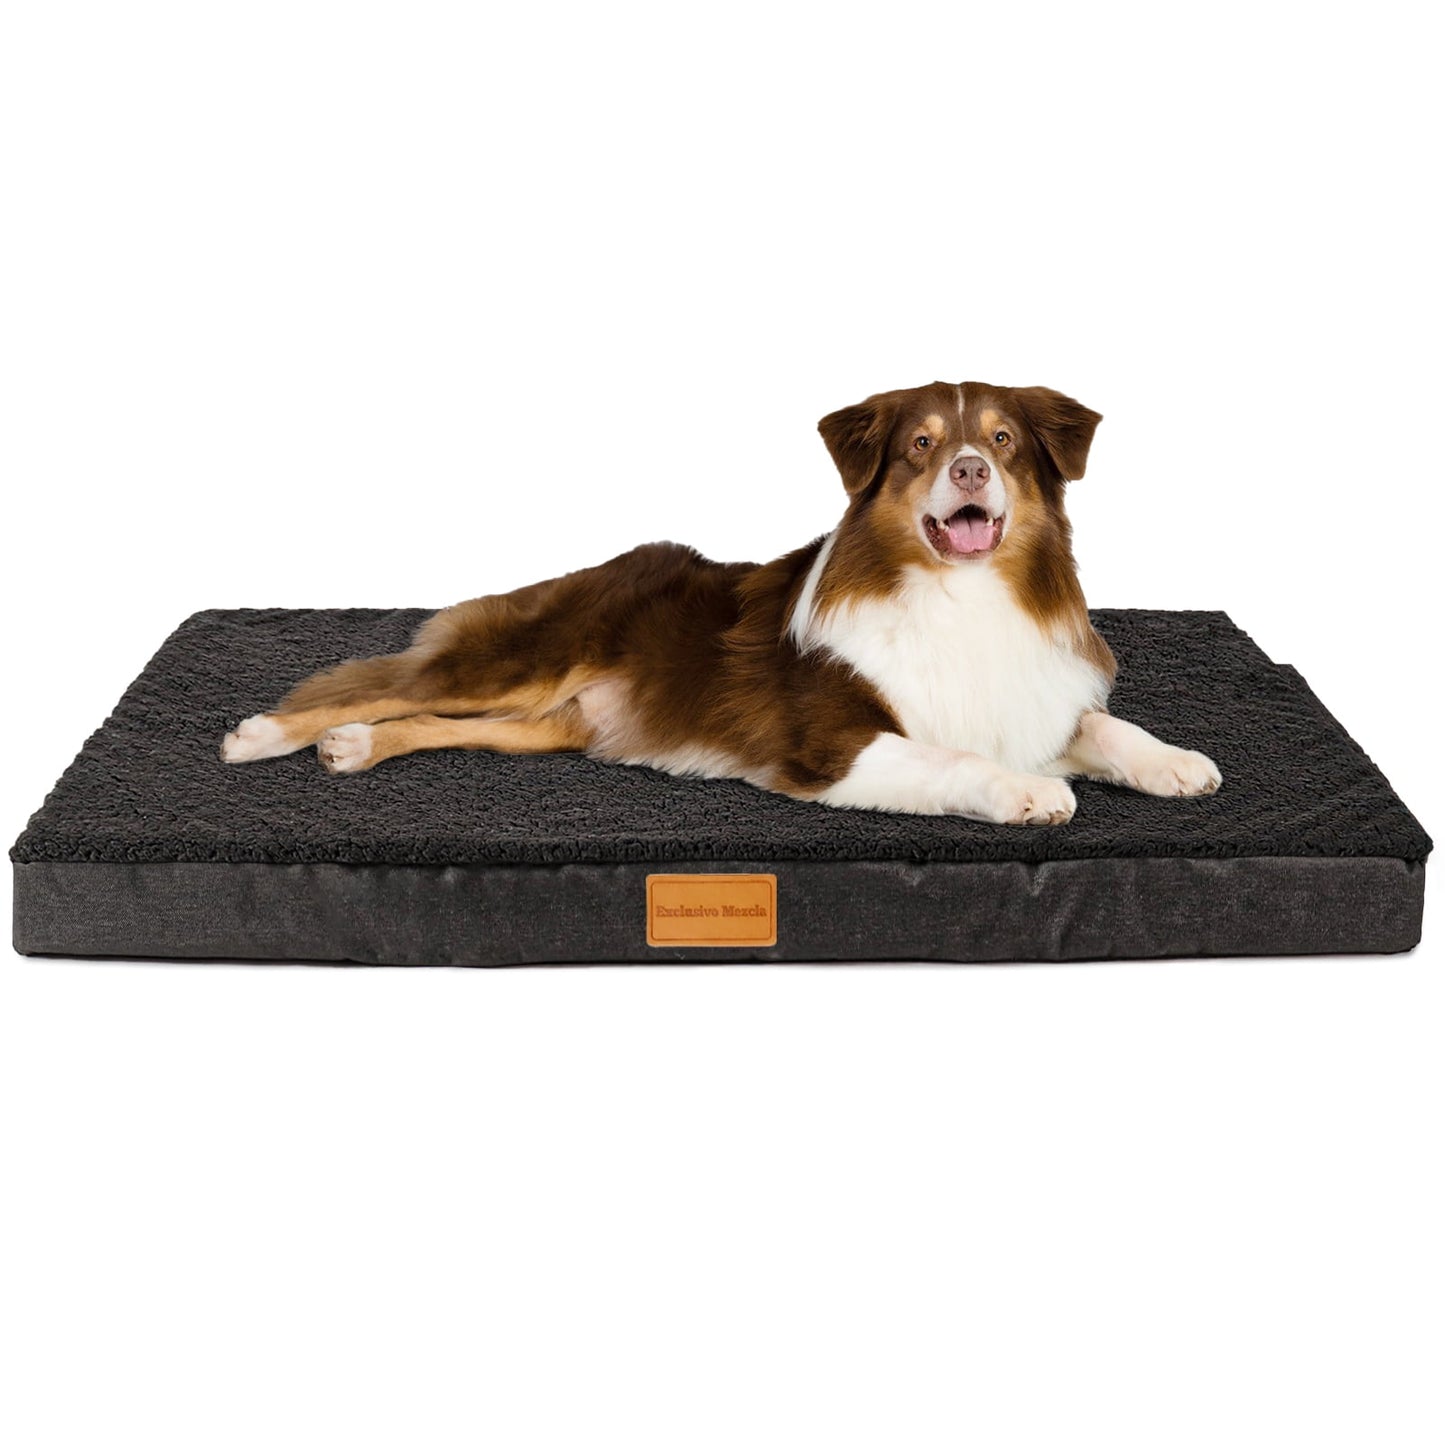 Exclusivo Mezcla Orthopedic Dog Bed for Medium Dogs 36''X24'', Egg Crate Foam Medium Dog Beds with Removable Washable Cover,Waterproof Pet Bed Mat, Black